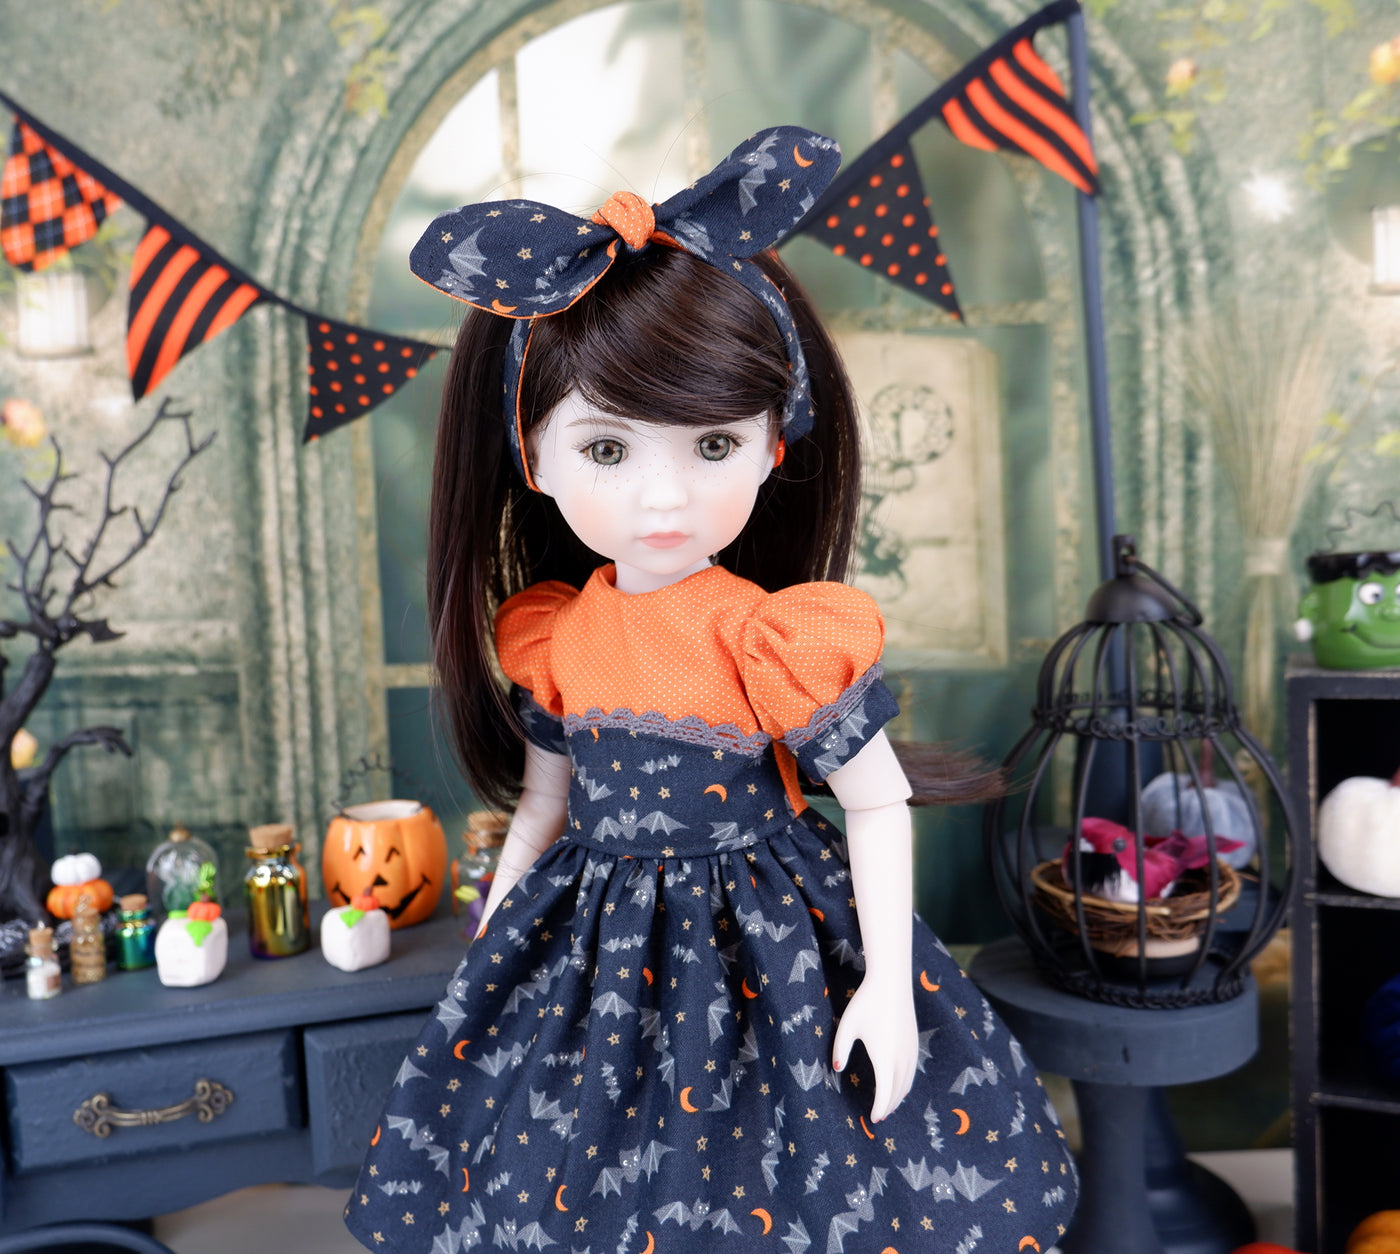 Bat Wings - dress and shoes for Ruby Red Fashion Friends doll